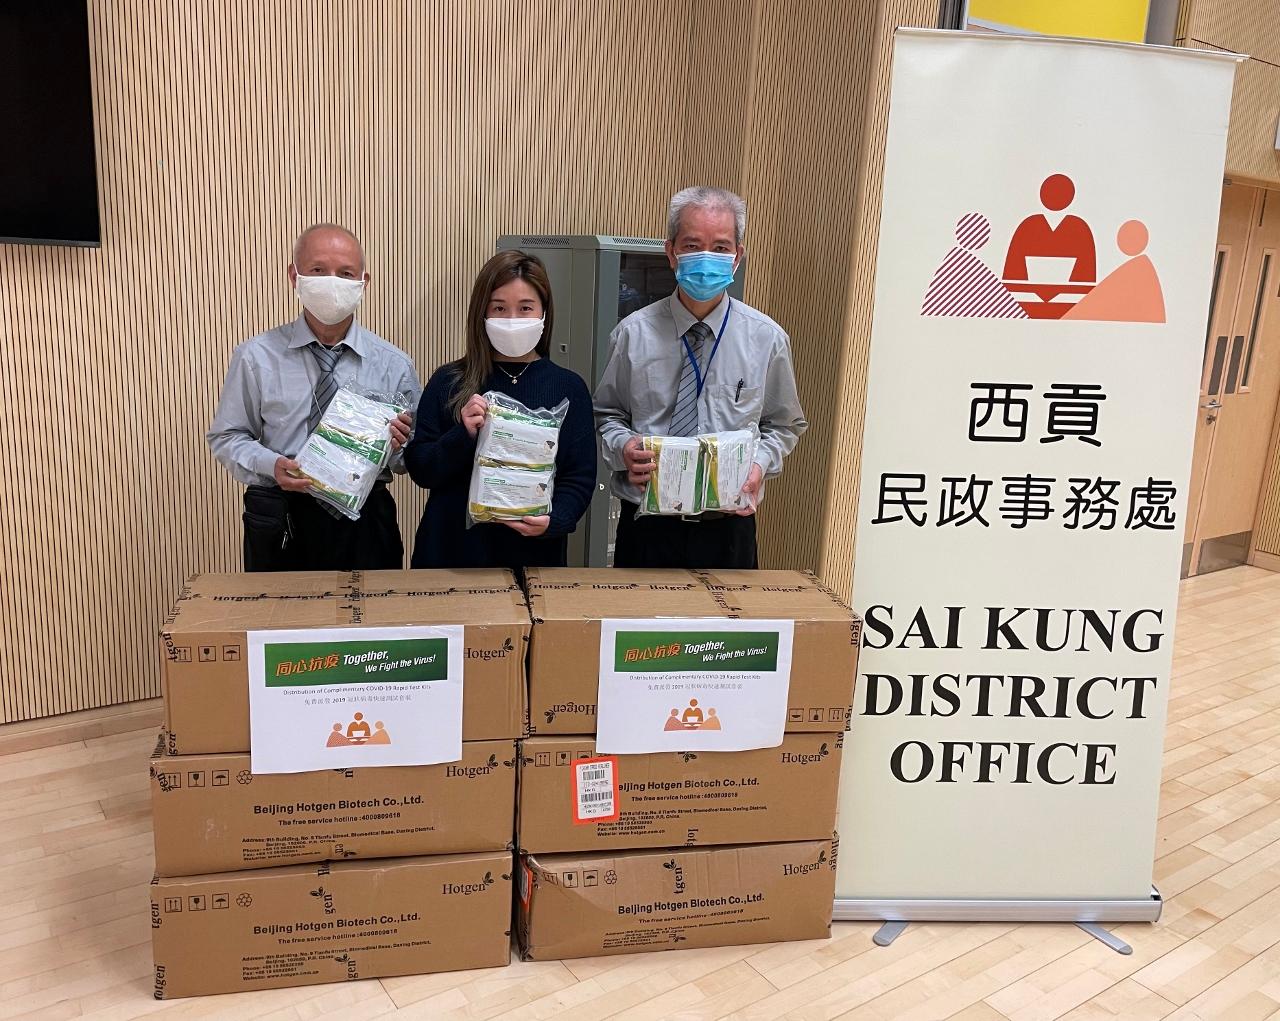 The Sai Kung District Office distributed COVID-19 rapid test kits to households, cleansing workers and property management staff living and working in Kin Ming Estate for voluntary testing through the property management company.